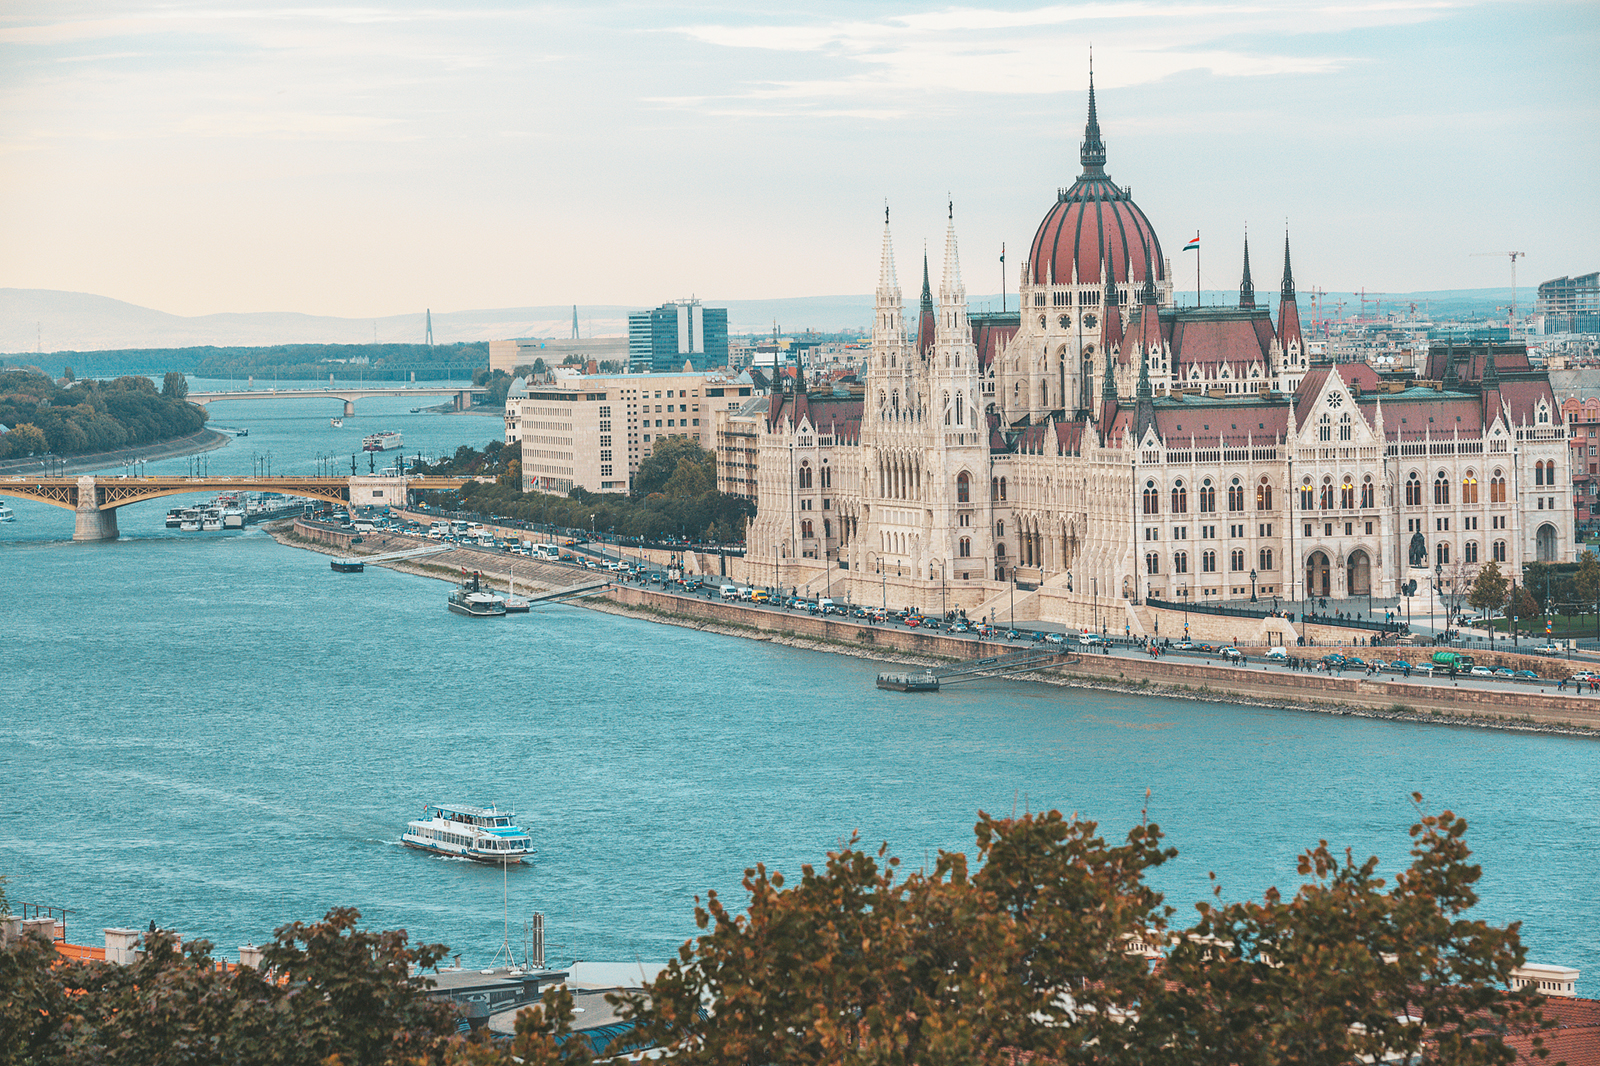 The Hungarian Parliament Building is one of the buildings that stand at exactly 96 meters tall in Budapest. /CFP